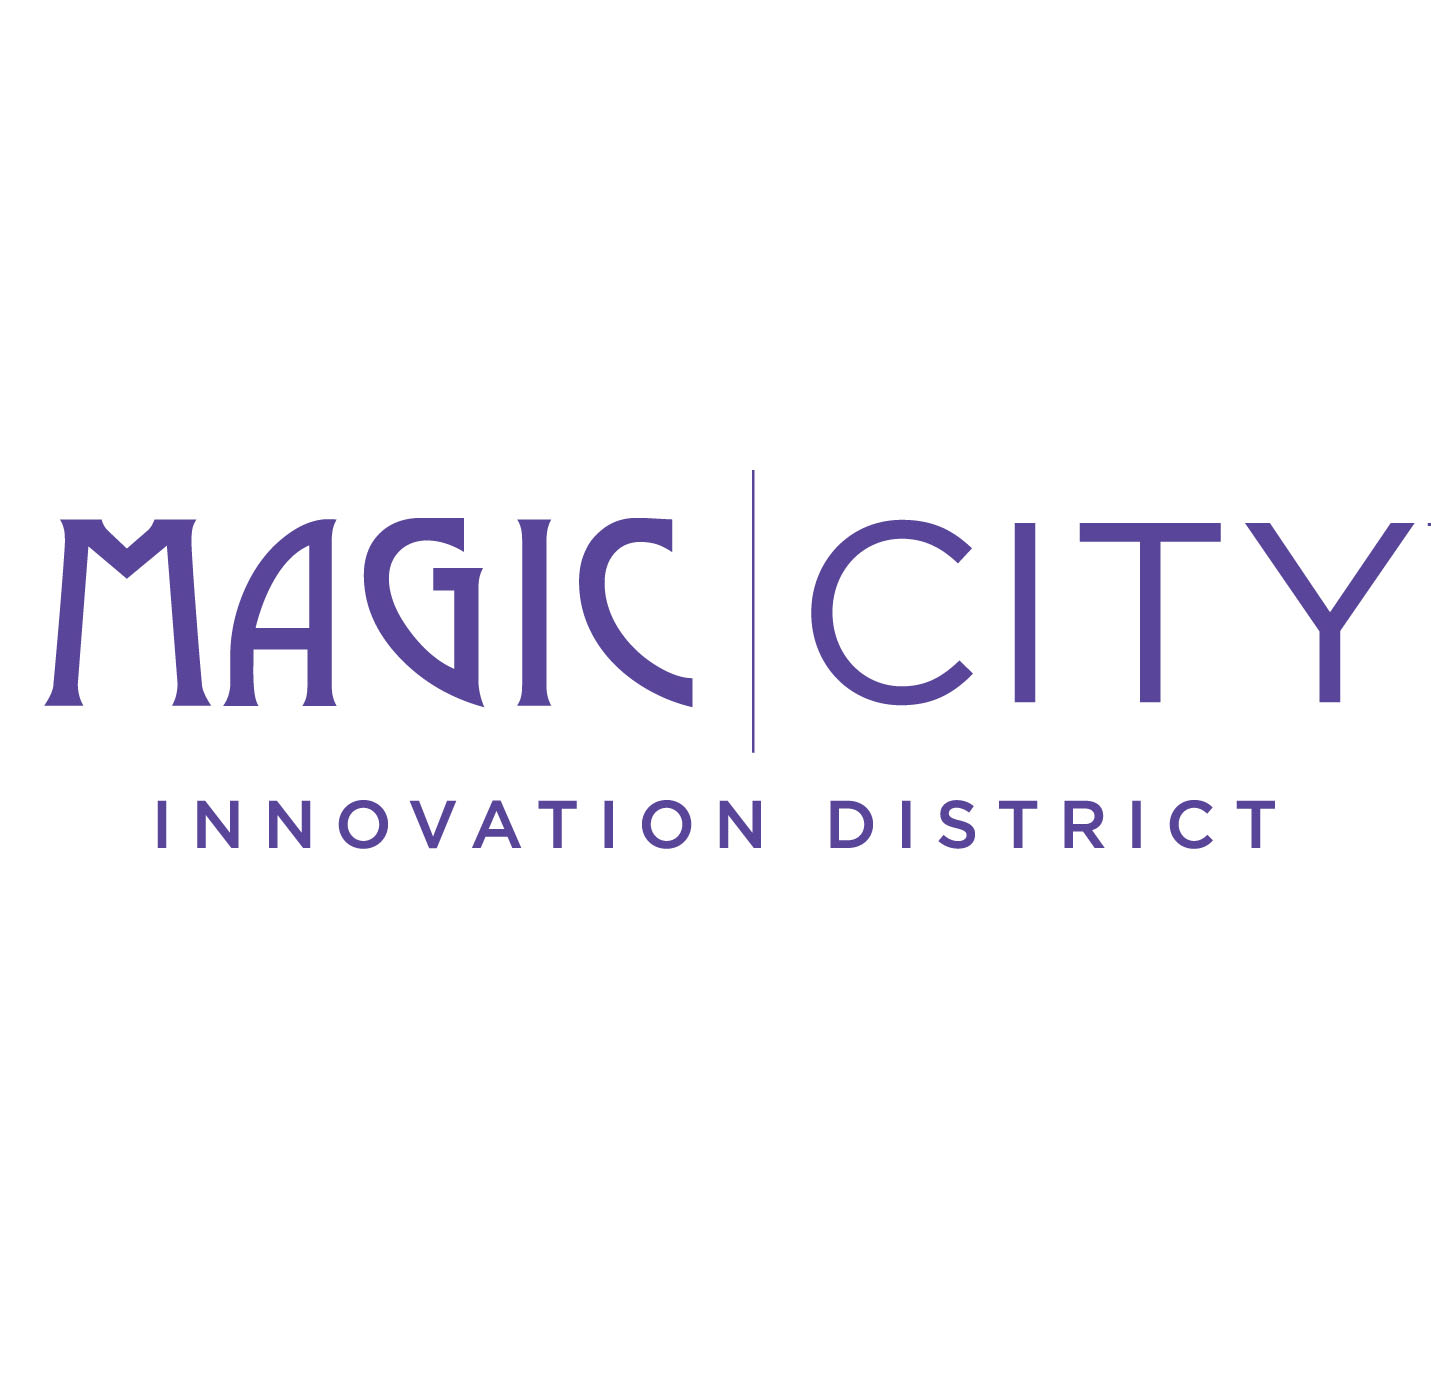 The Magic City Innovation District: A Hub of Art, Culture, and Technology